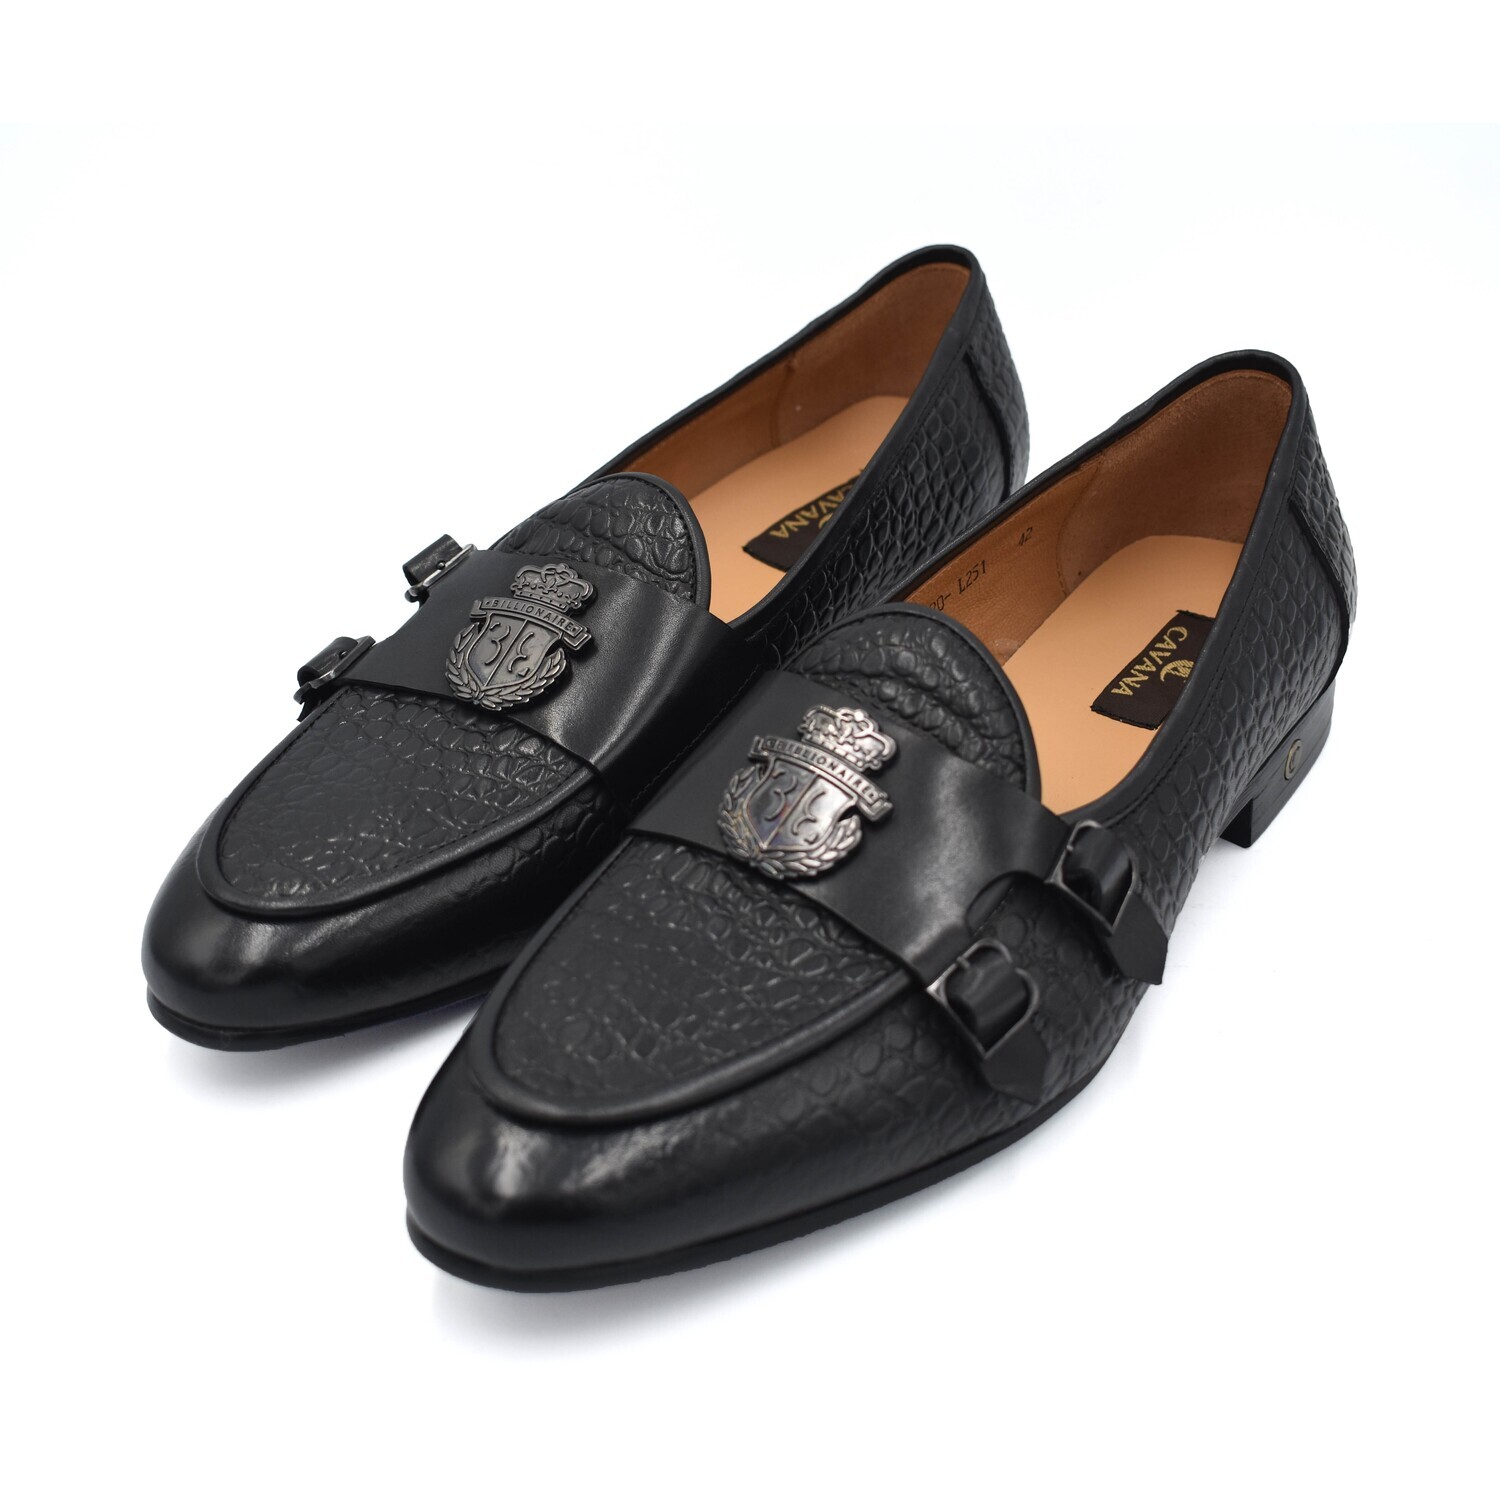 Genuine leather formal shoes for men